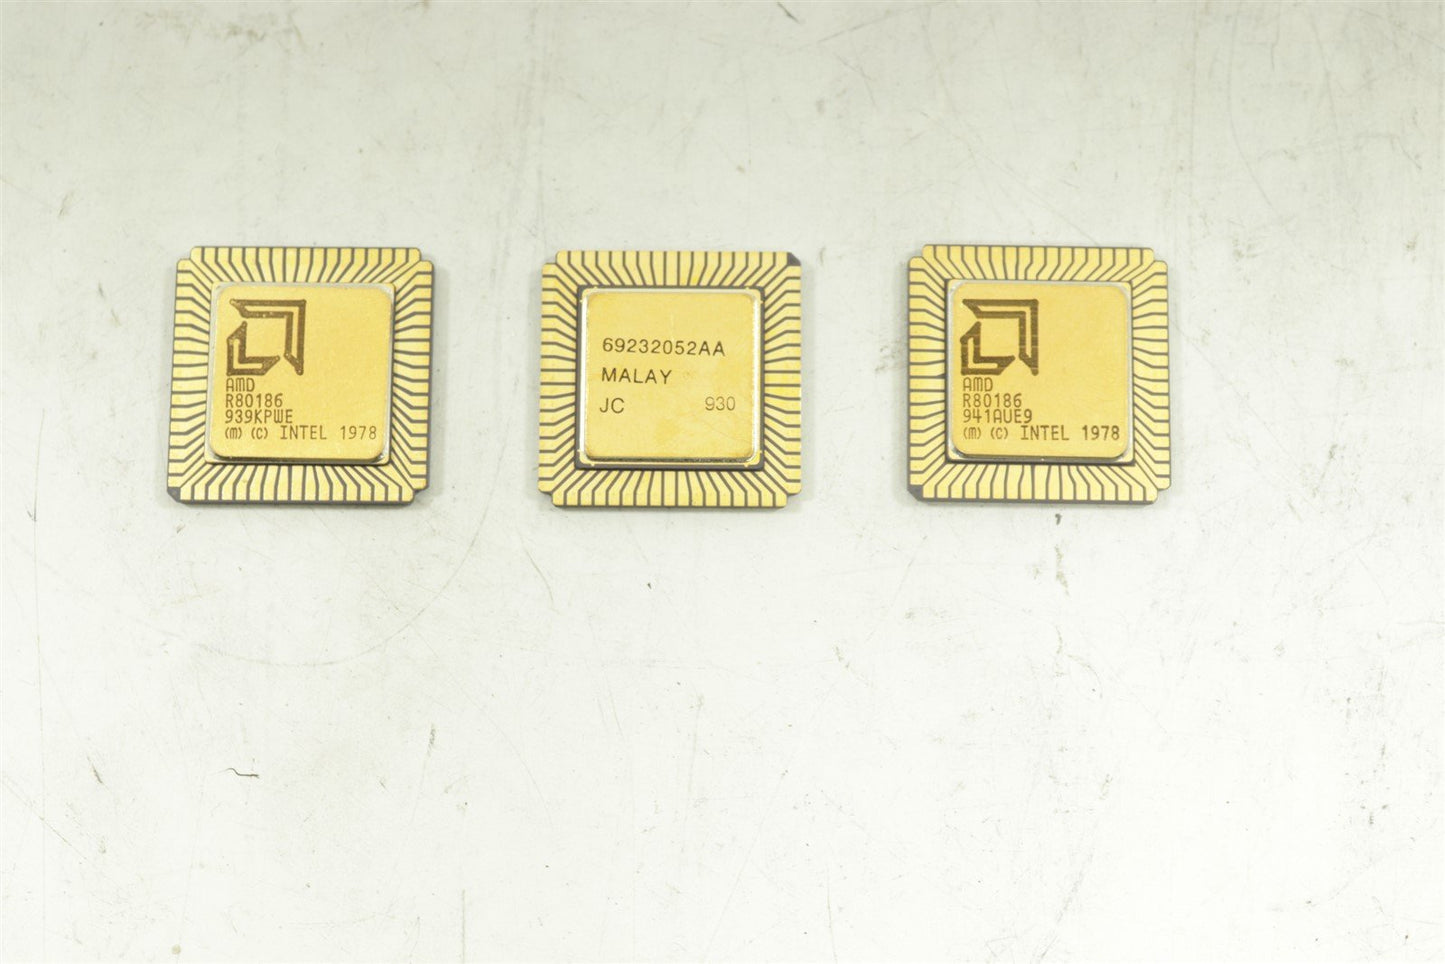 3 CPU Chips: One R80286-10 , Two R80186